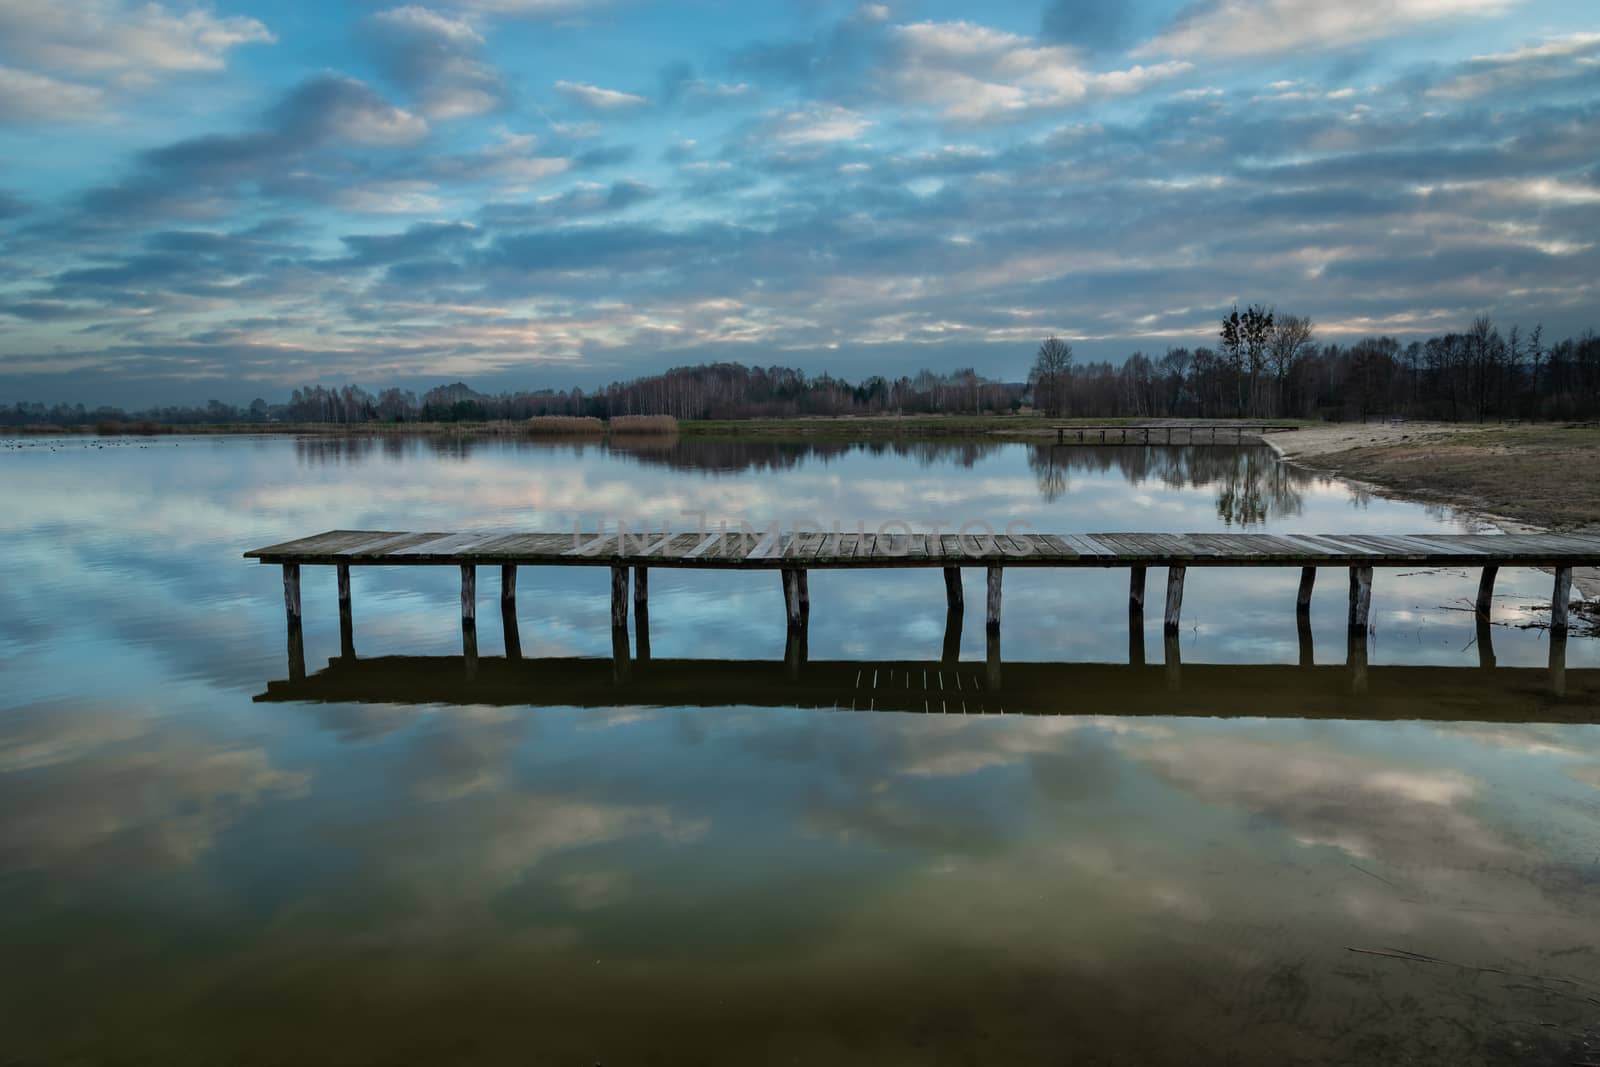 Wooden bridge on a calm lake and evening clouds by darekb22